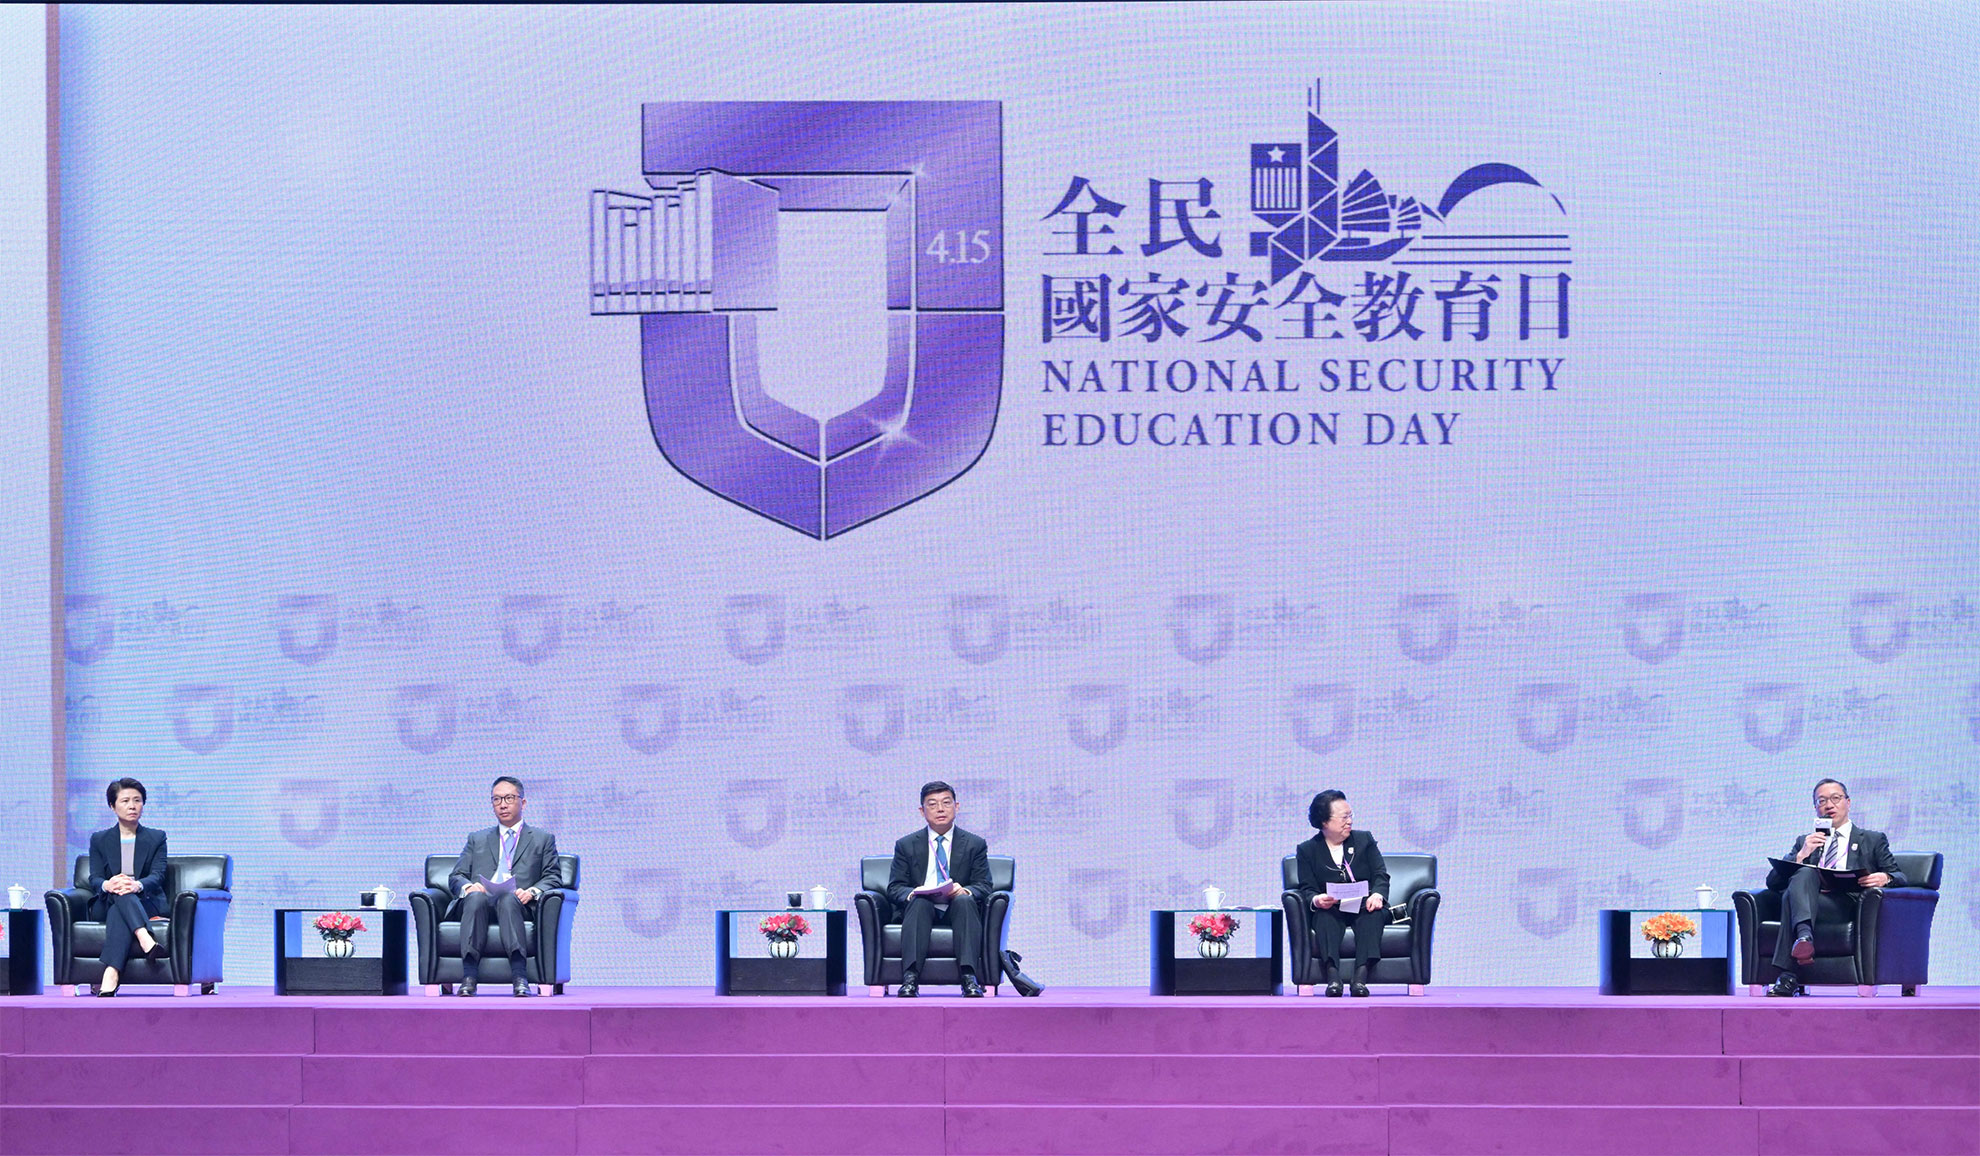 The Secretary for Justice, Mr Paul Lam, SC, hosted the seminar on “The Hong Kong National Security Law and the practice of the rule of law” at the National Security Education Day today (April 15). Photo shows (from left) the Deputy Commissioner of Police (National Security), Ms Edwina Lau; Mr Rimsky Yuen, SC; Professor Wang Zhenmin of the School of Law of Tsinghua University; the Vice-Chairperson of the Hong Kong Special Administrative Region Basic Law Committee under the Standing Committee of the National People's Congress, Ms Maria Tam; and Mr Lam exchanging views at the seminar.